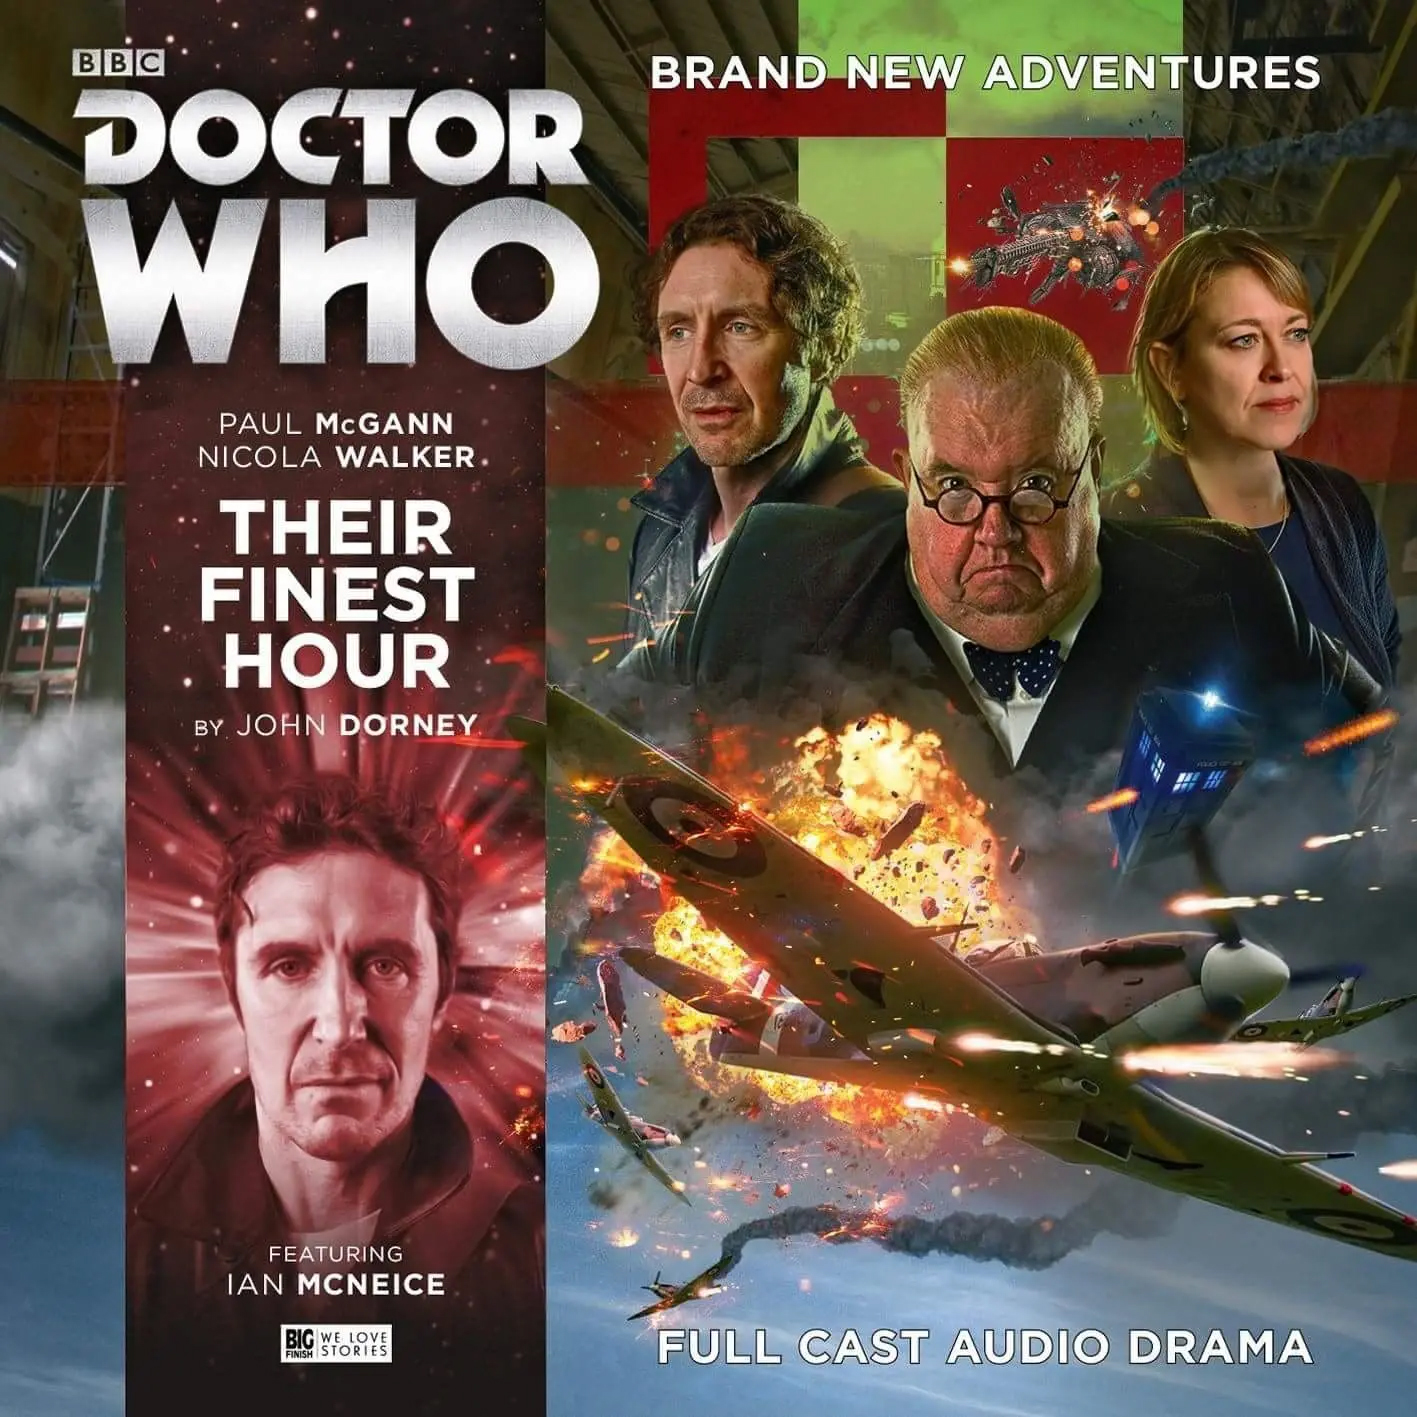 AUDIO: Their Finest Hour [+]Loading...["Their Finest Hour (audio story)"]